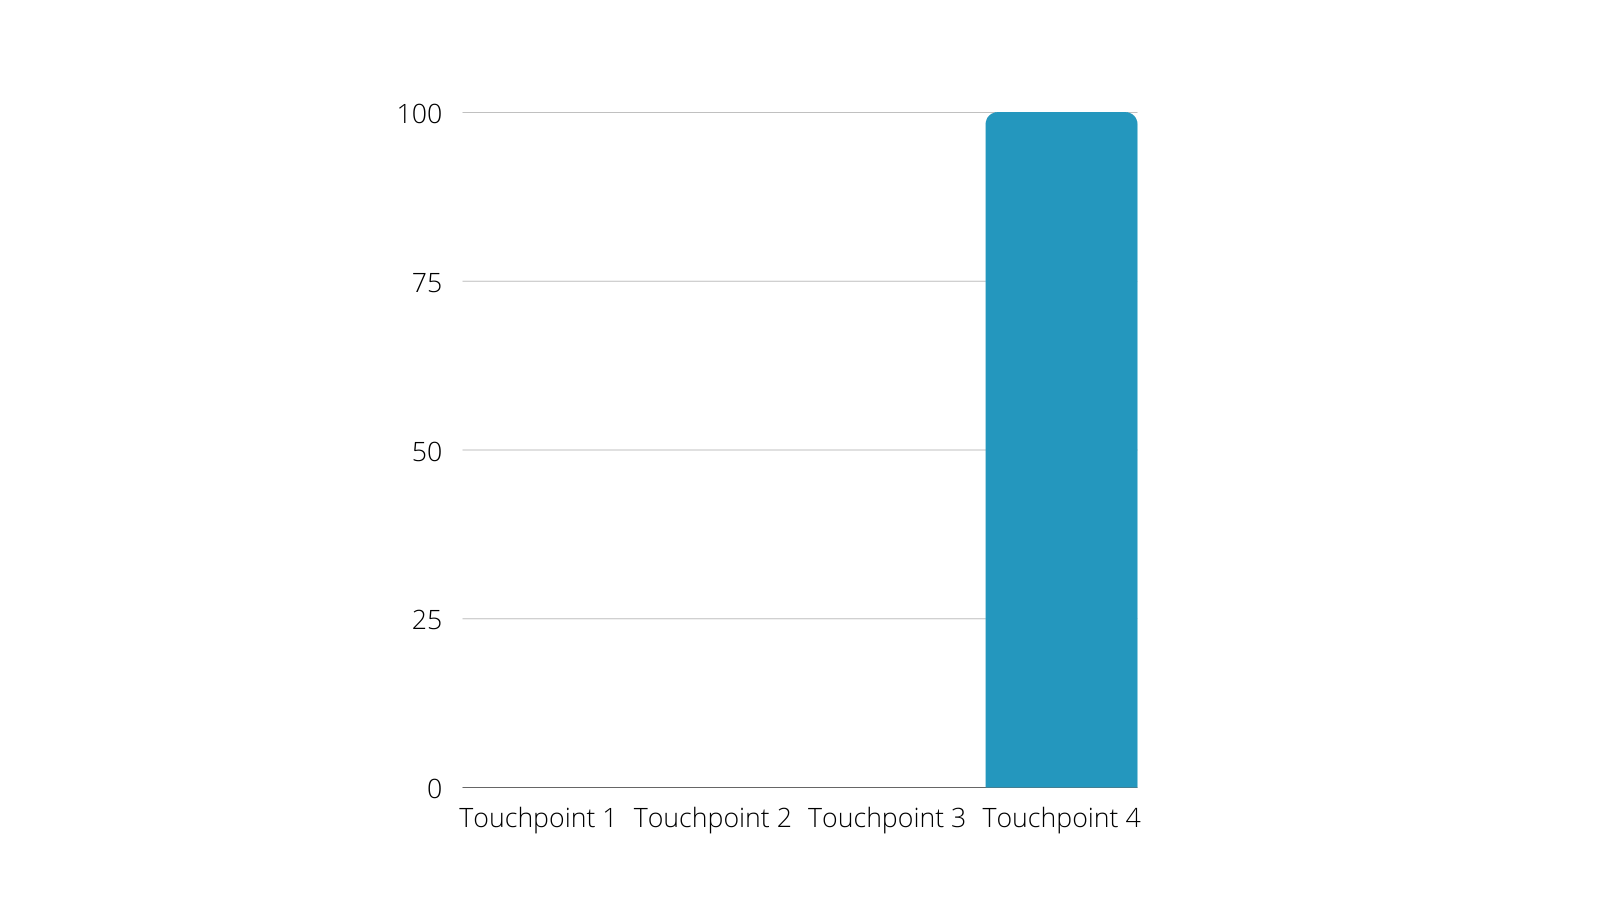 A bar graph with touchpoint 4 at 100 and touchpoints 1-3 at 0